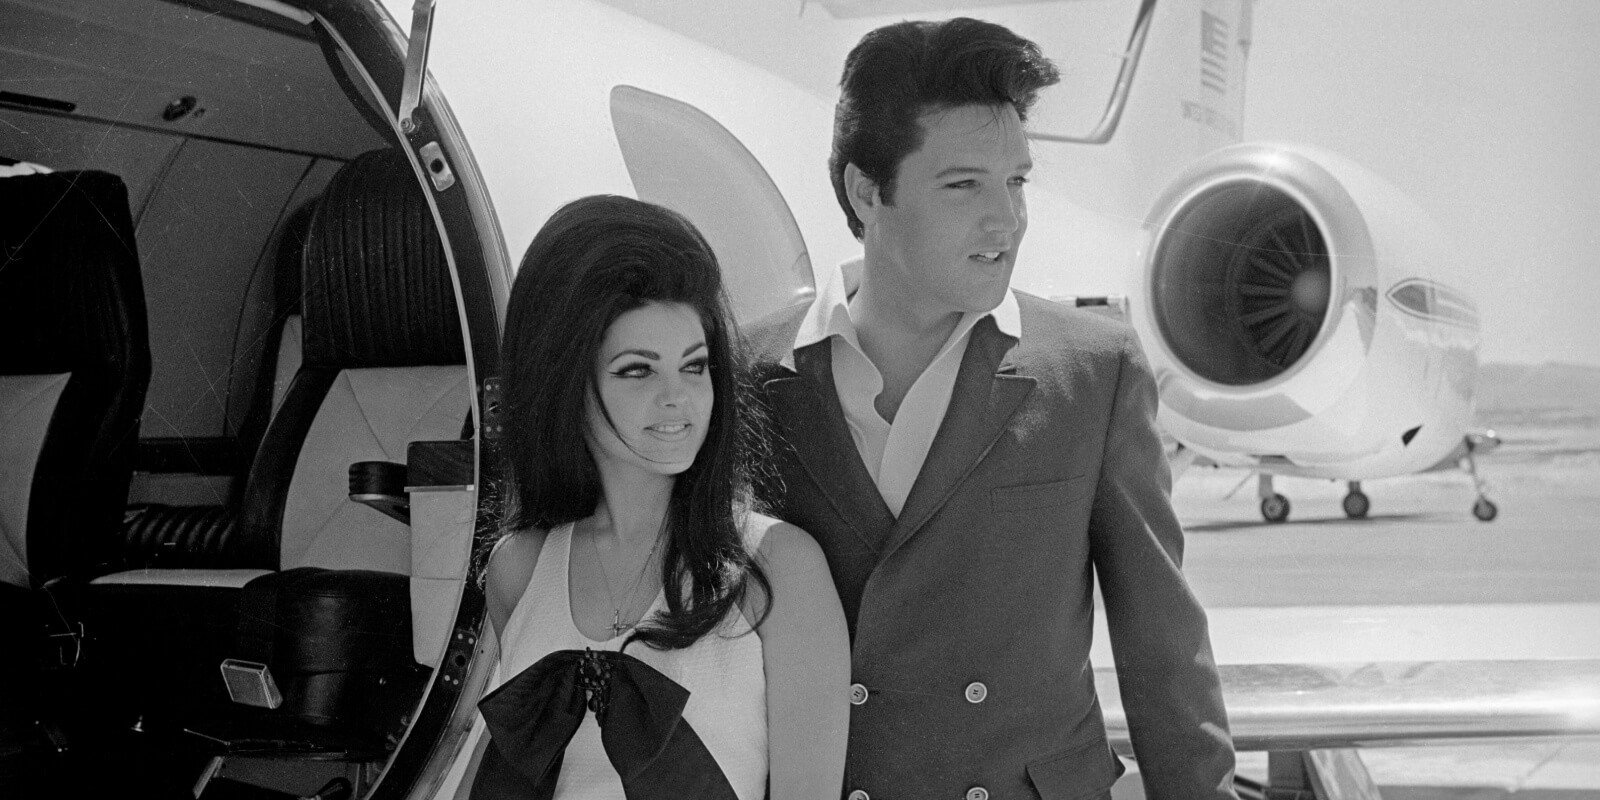 Priscilla Presley and Elvis Presley shortly after their marriage in May 1967.